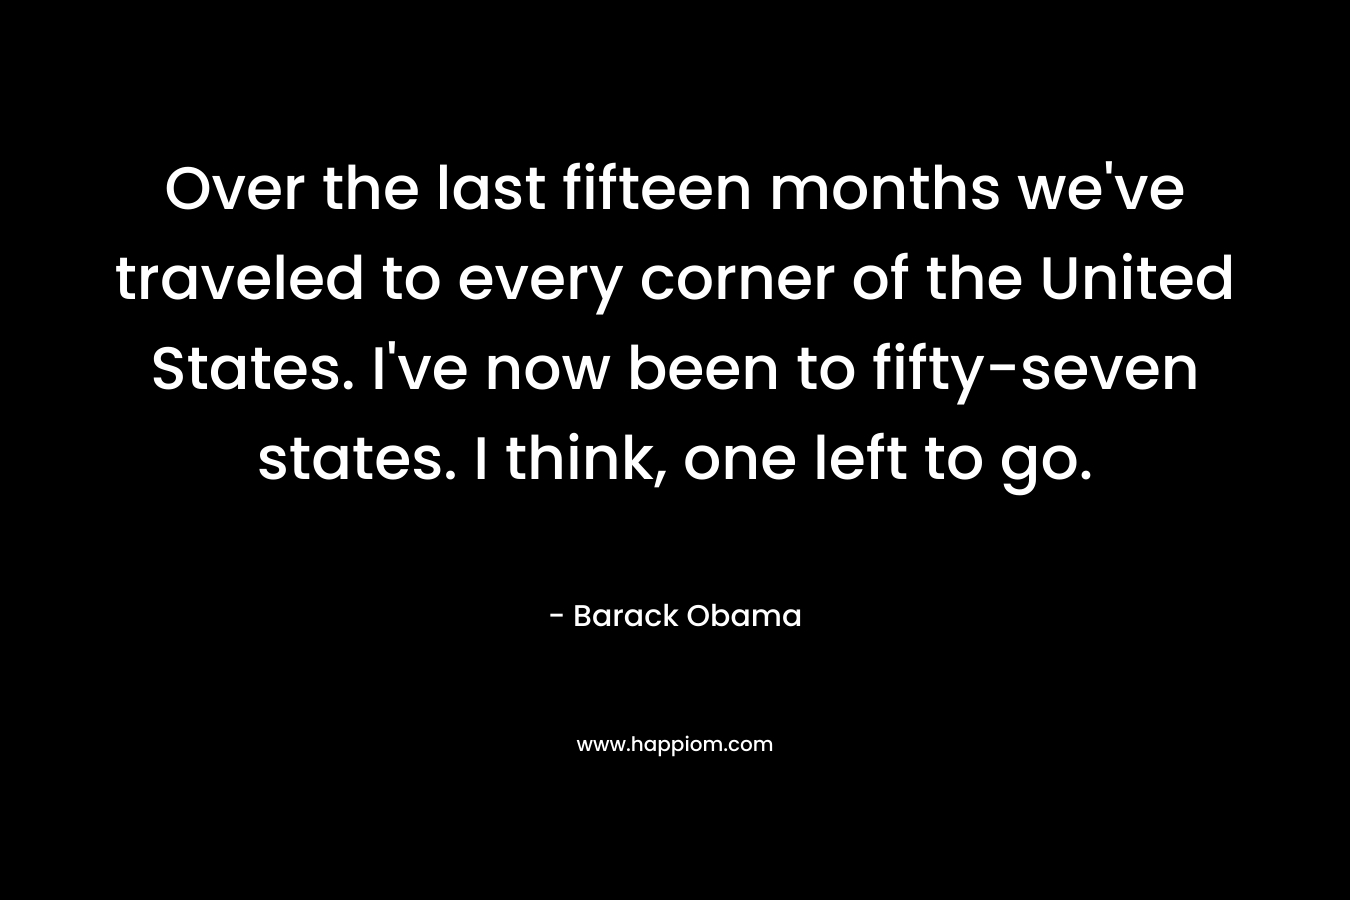 Over the last fifteen months we’ve traveled to every corner of the United States. I’ve now been to fifty-seven states. I think, one left to go. – Barack Obama